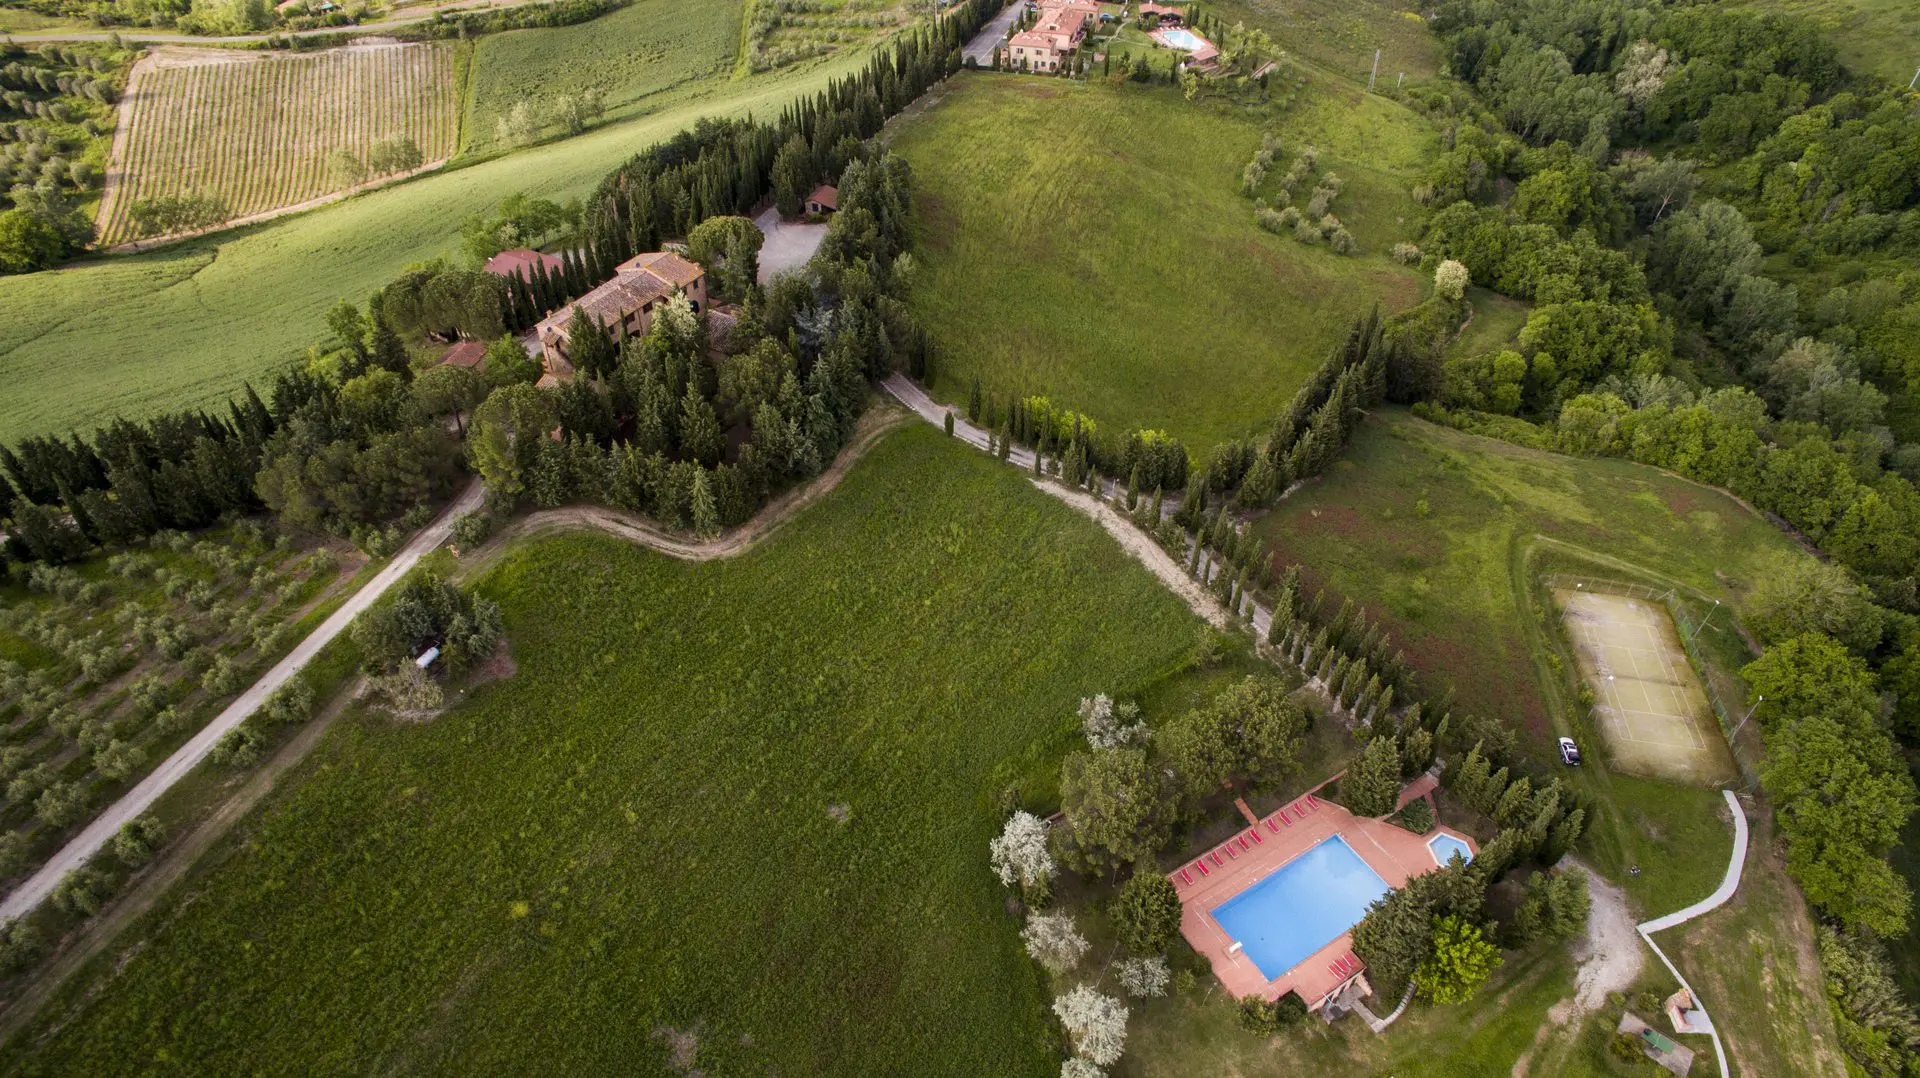 A bird 's eye view of some houses and fields.